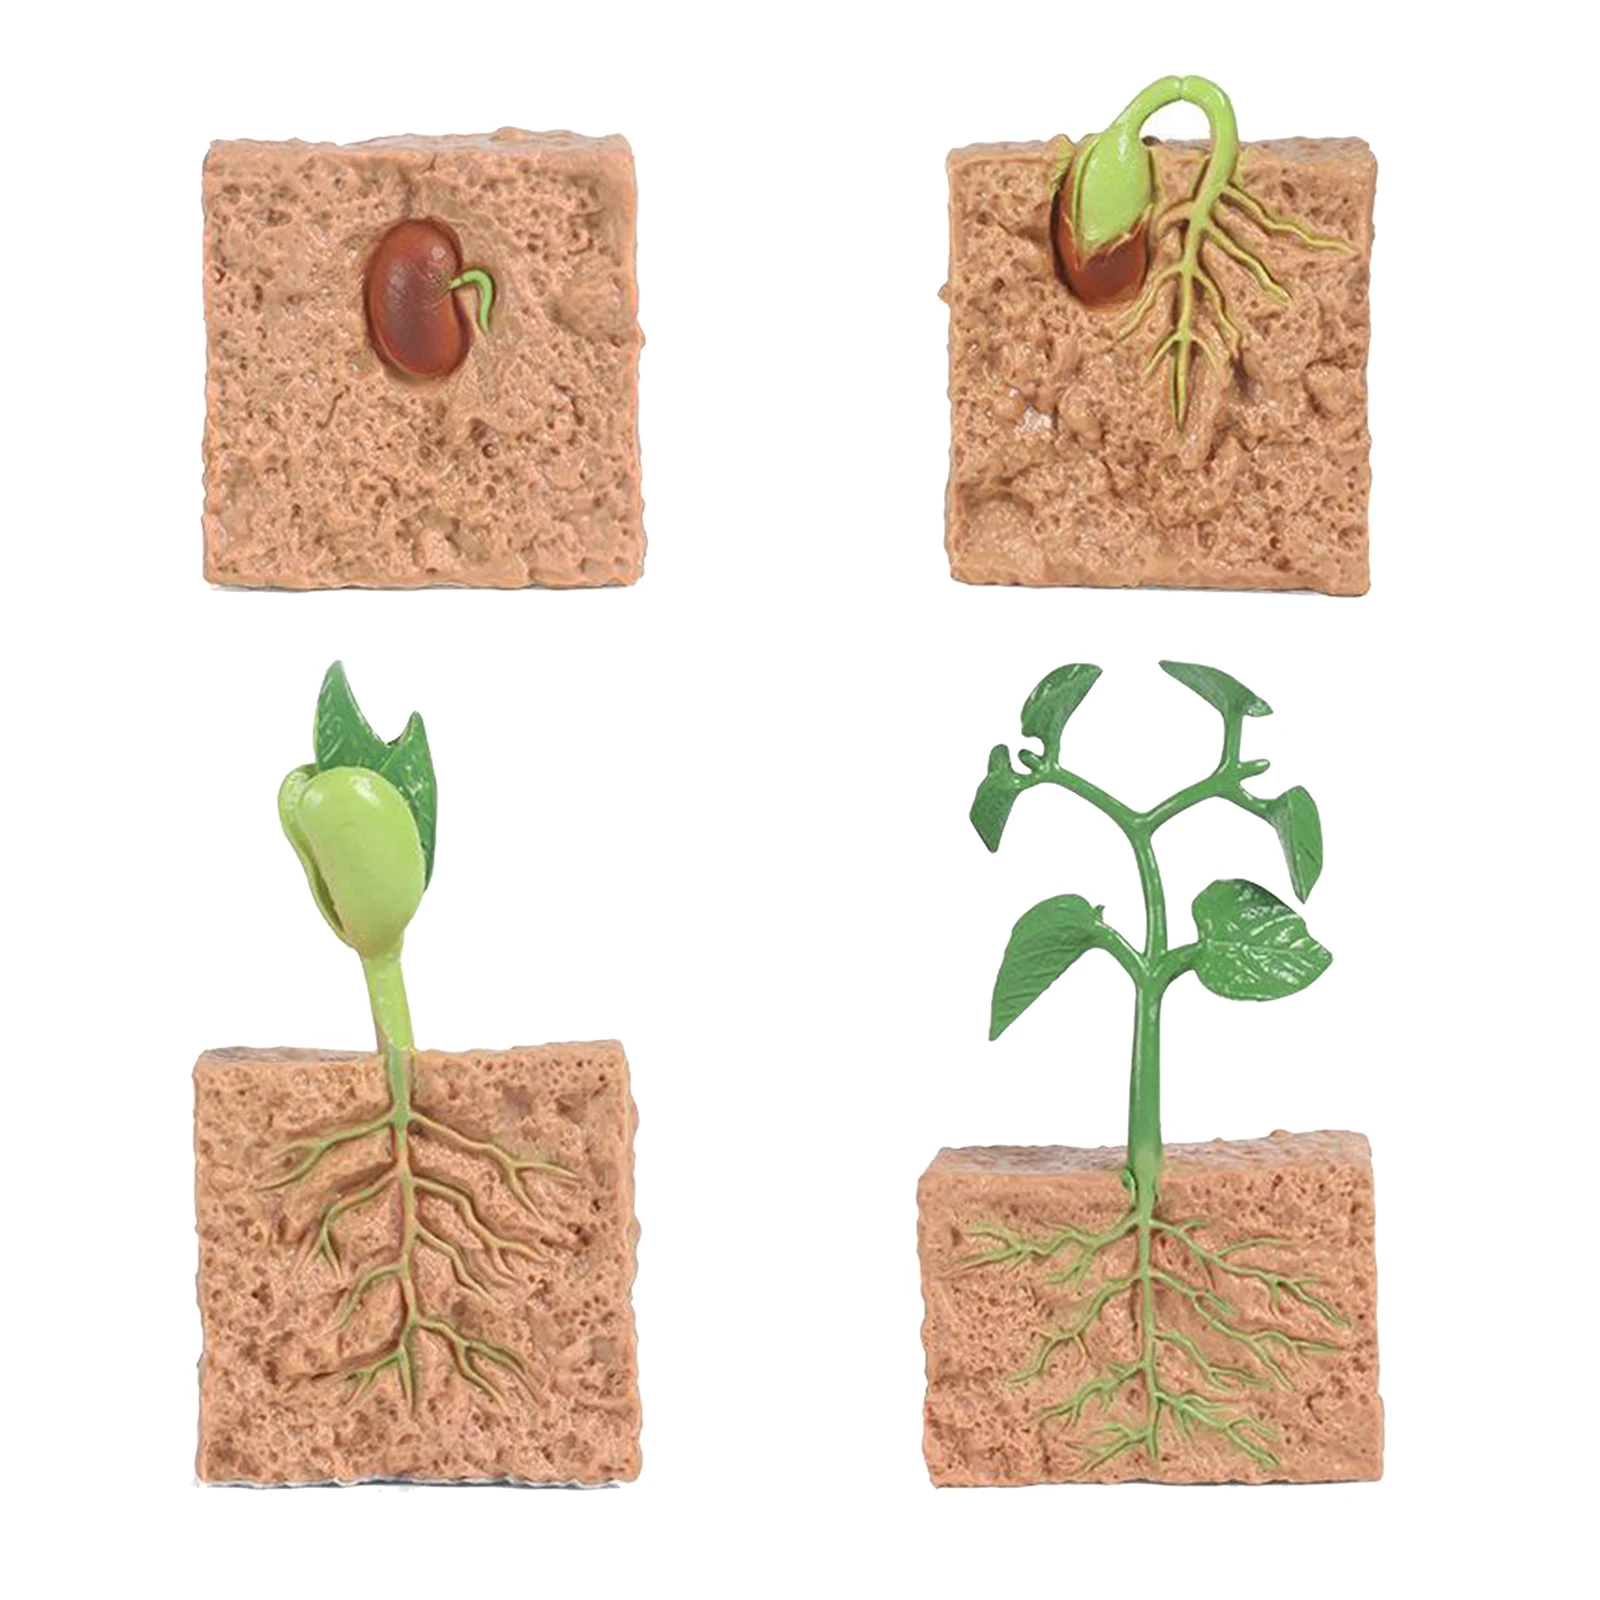 Details about   Kids Plant Seeds Growth Life Cycle Playset Cognitive Toys Teaching Aids 